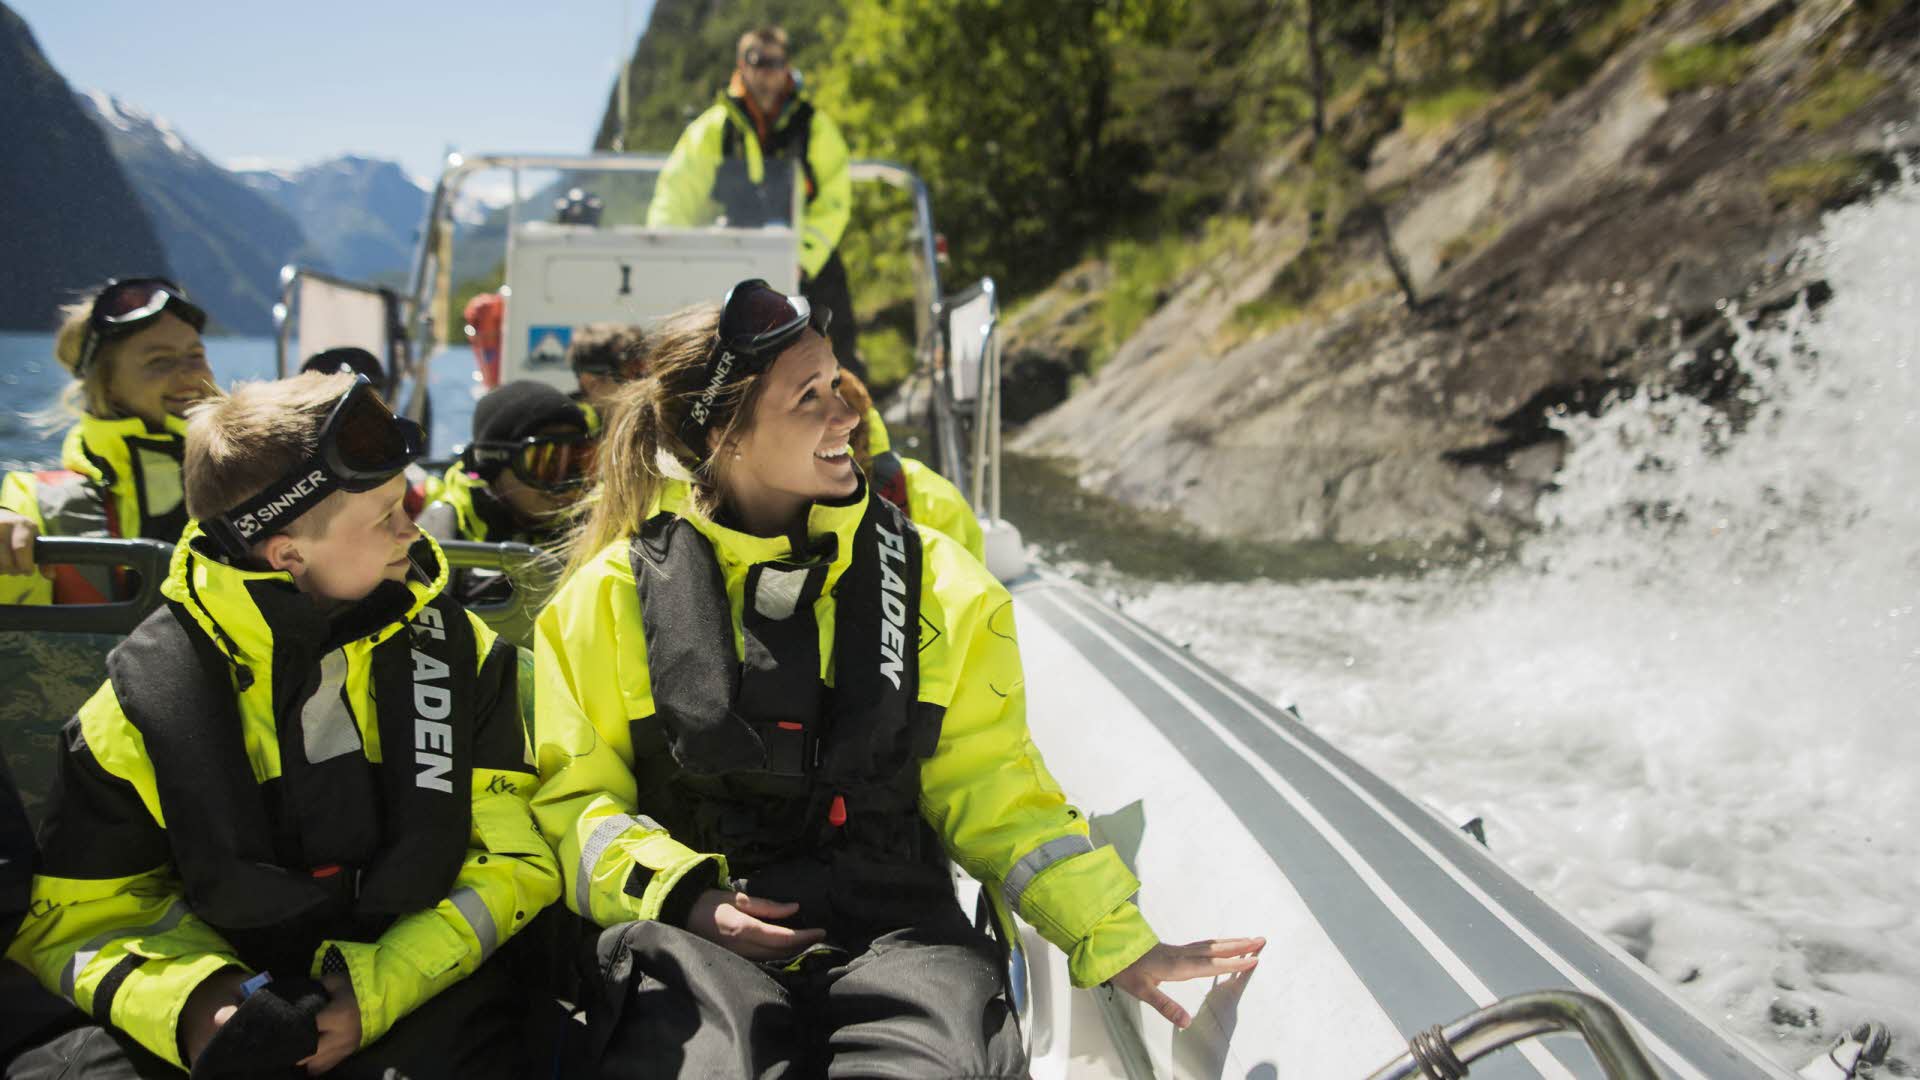 Smiling women and children in dry suits smiling on a RIB near a waterfall in the Nærøyfjord